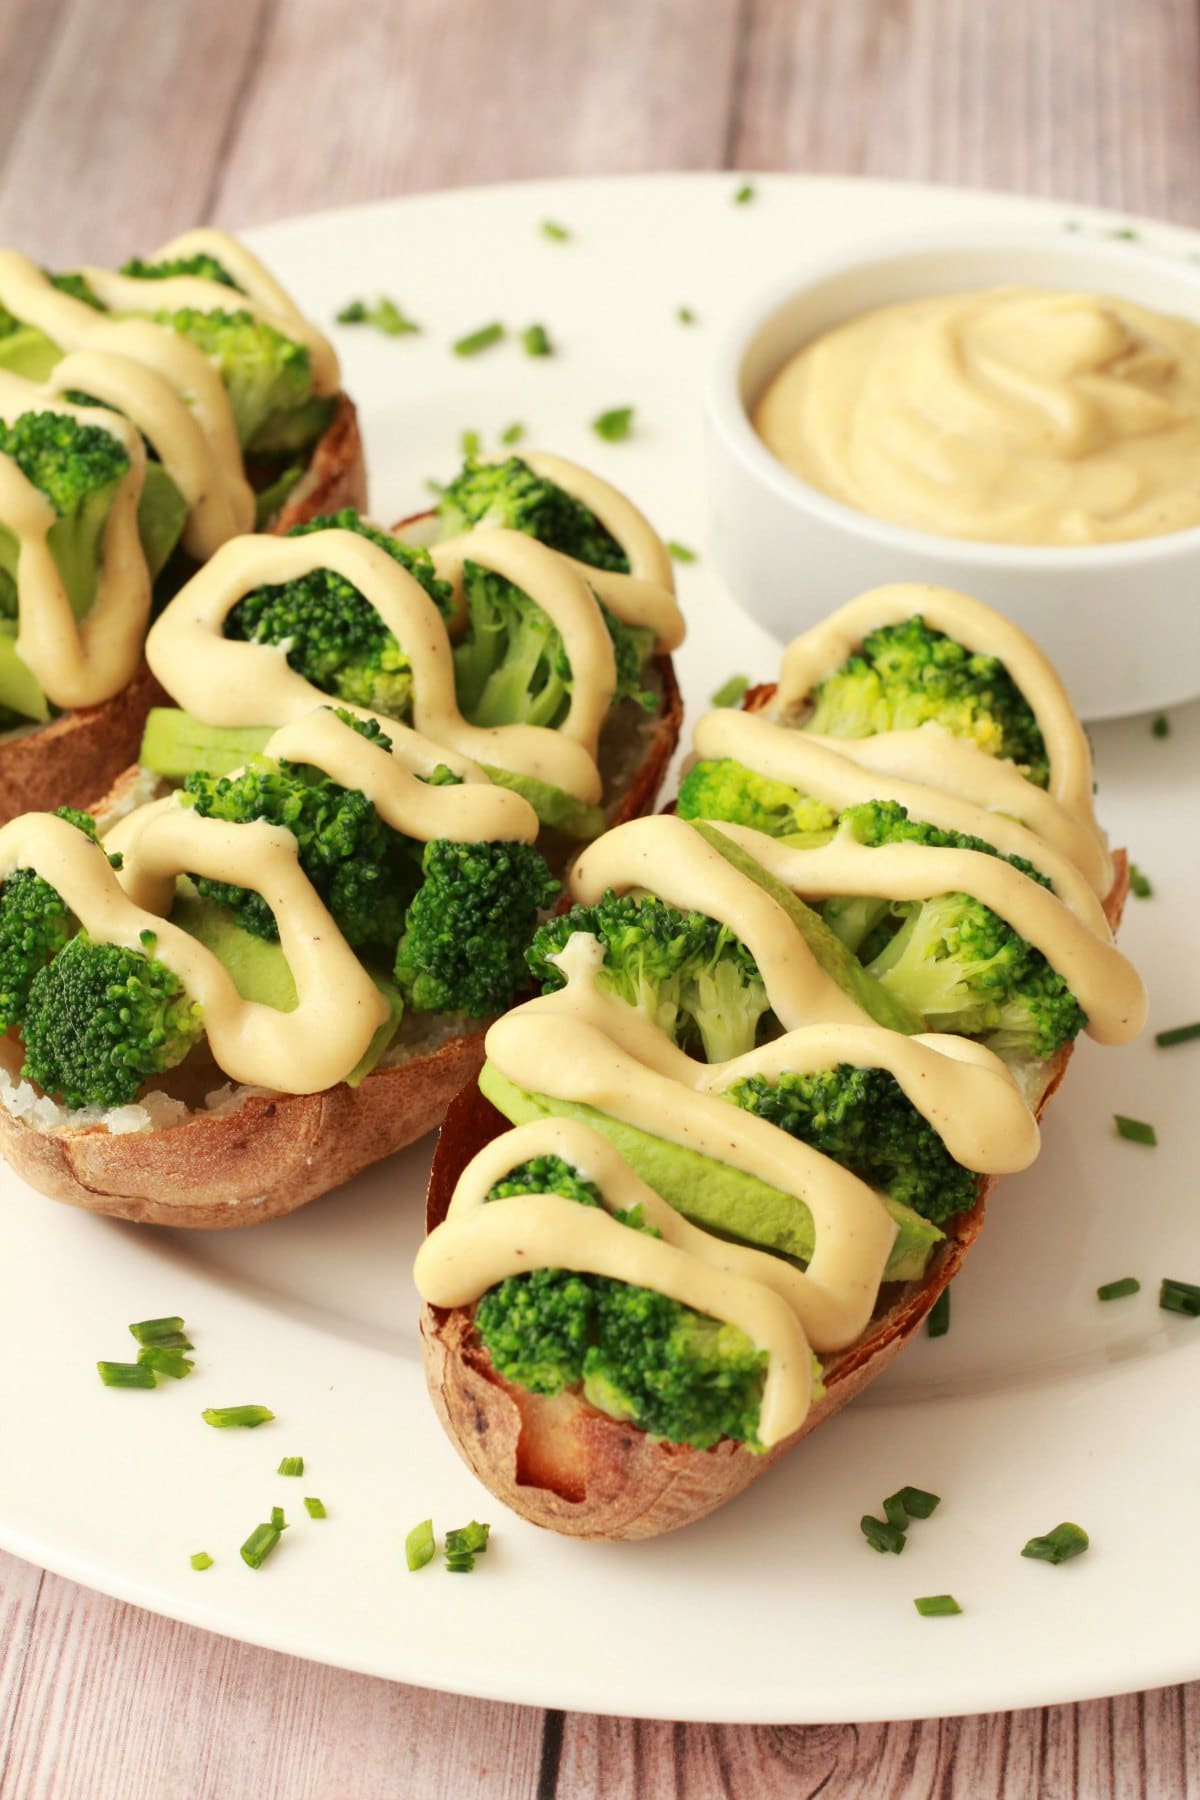 Cashew cheese sauce drizzled over baked potatoes and broccoli on a white plate. 